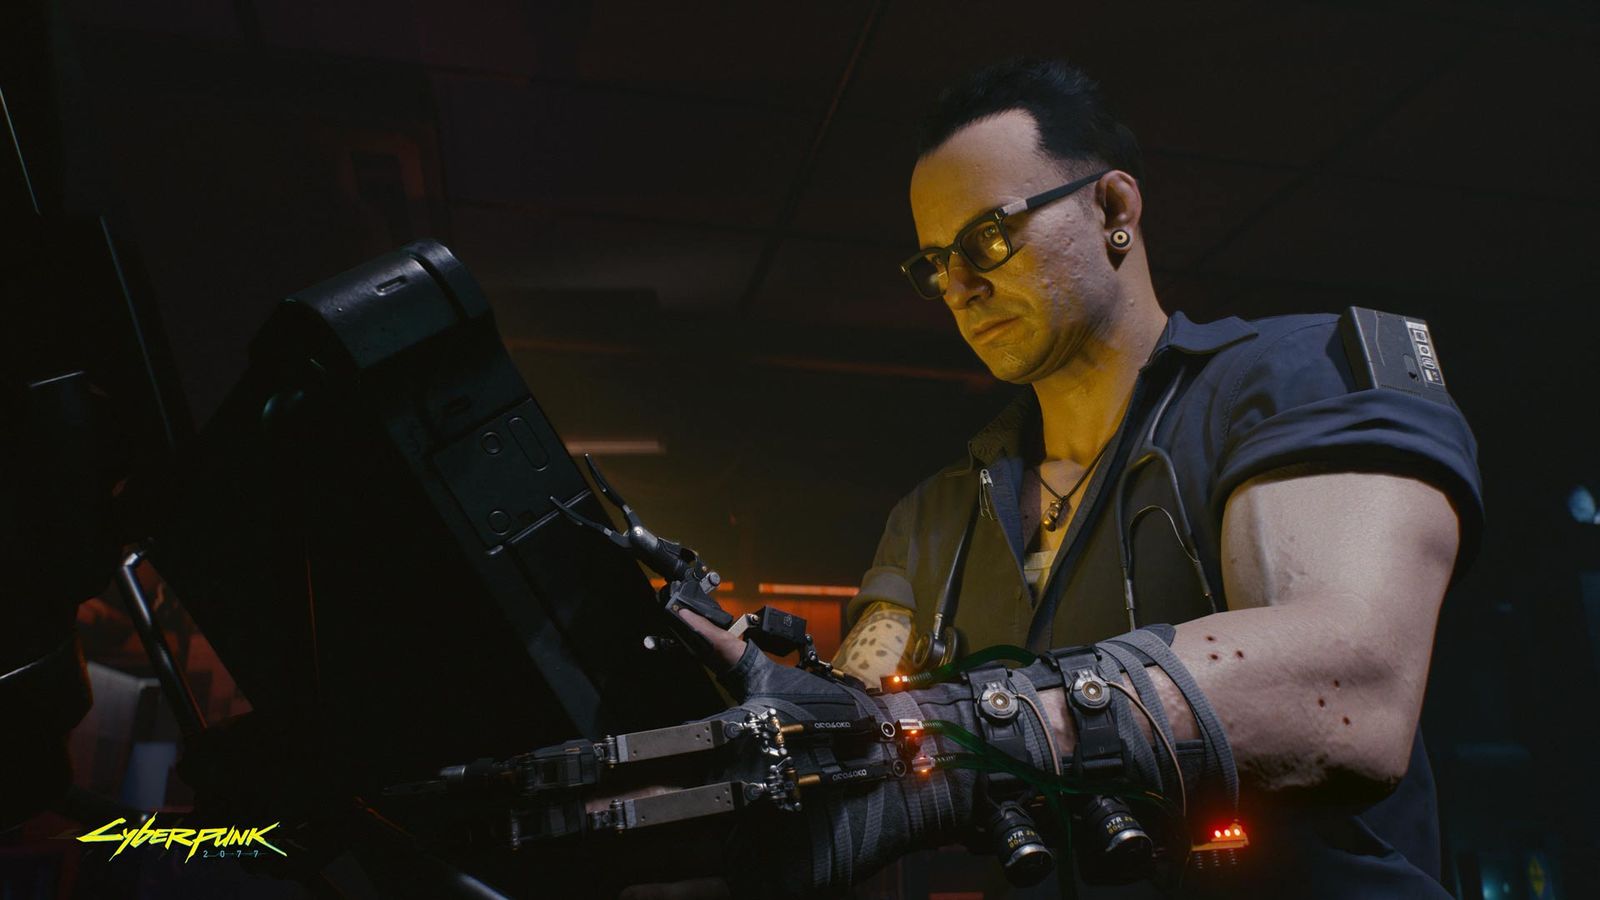 A look at the Ripperdoc Viktor from Cyberpunk 2077